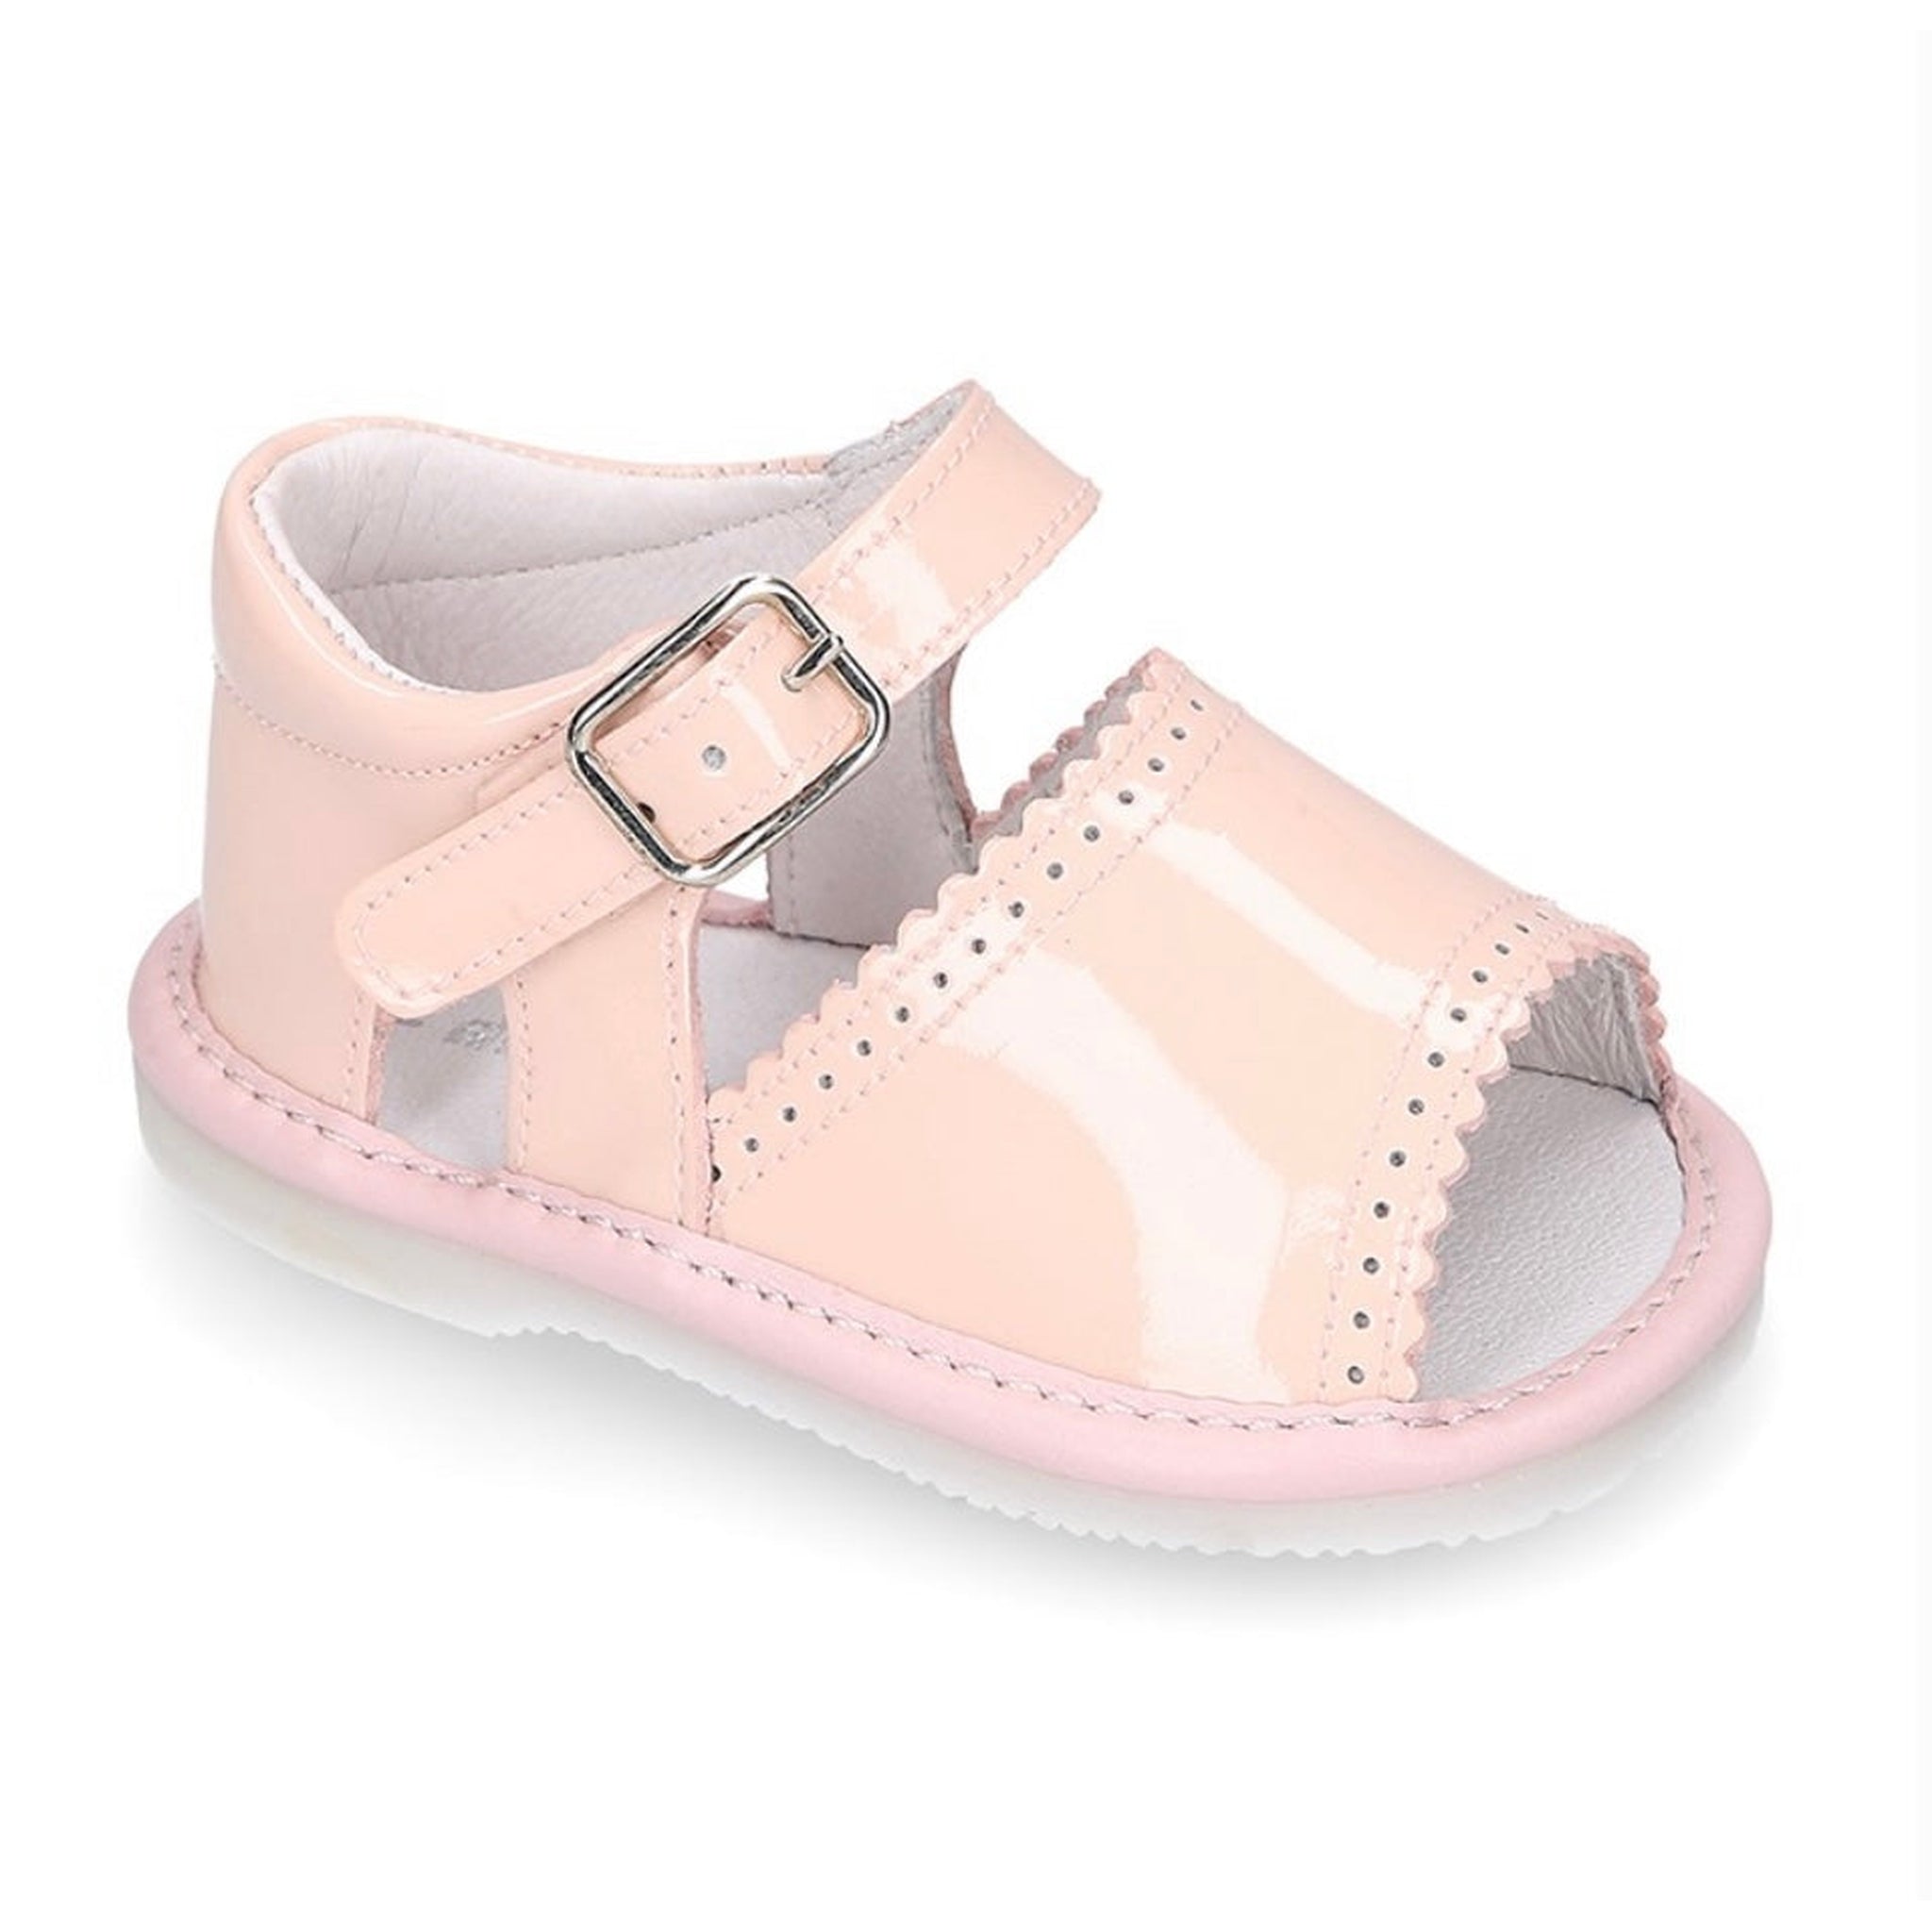 Patent Leather Sandal - Pink